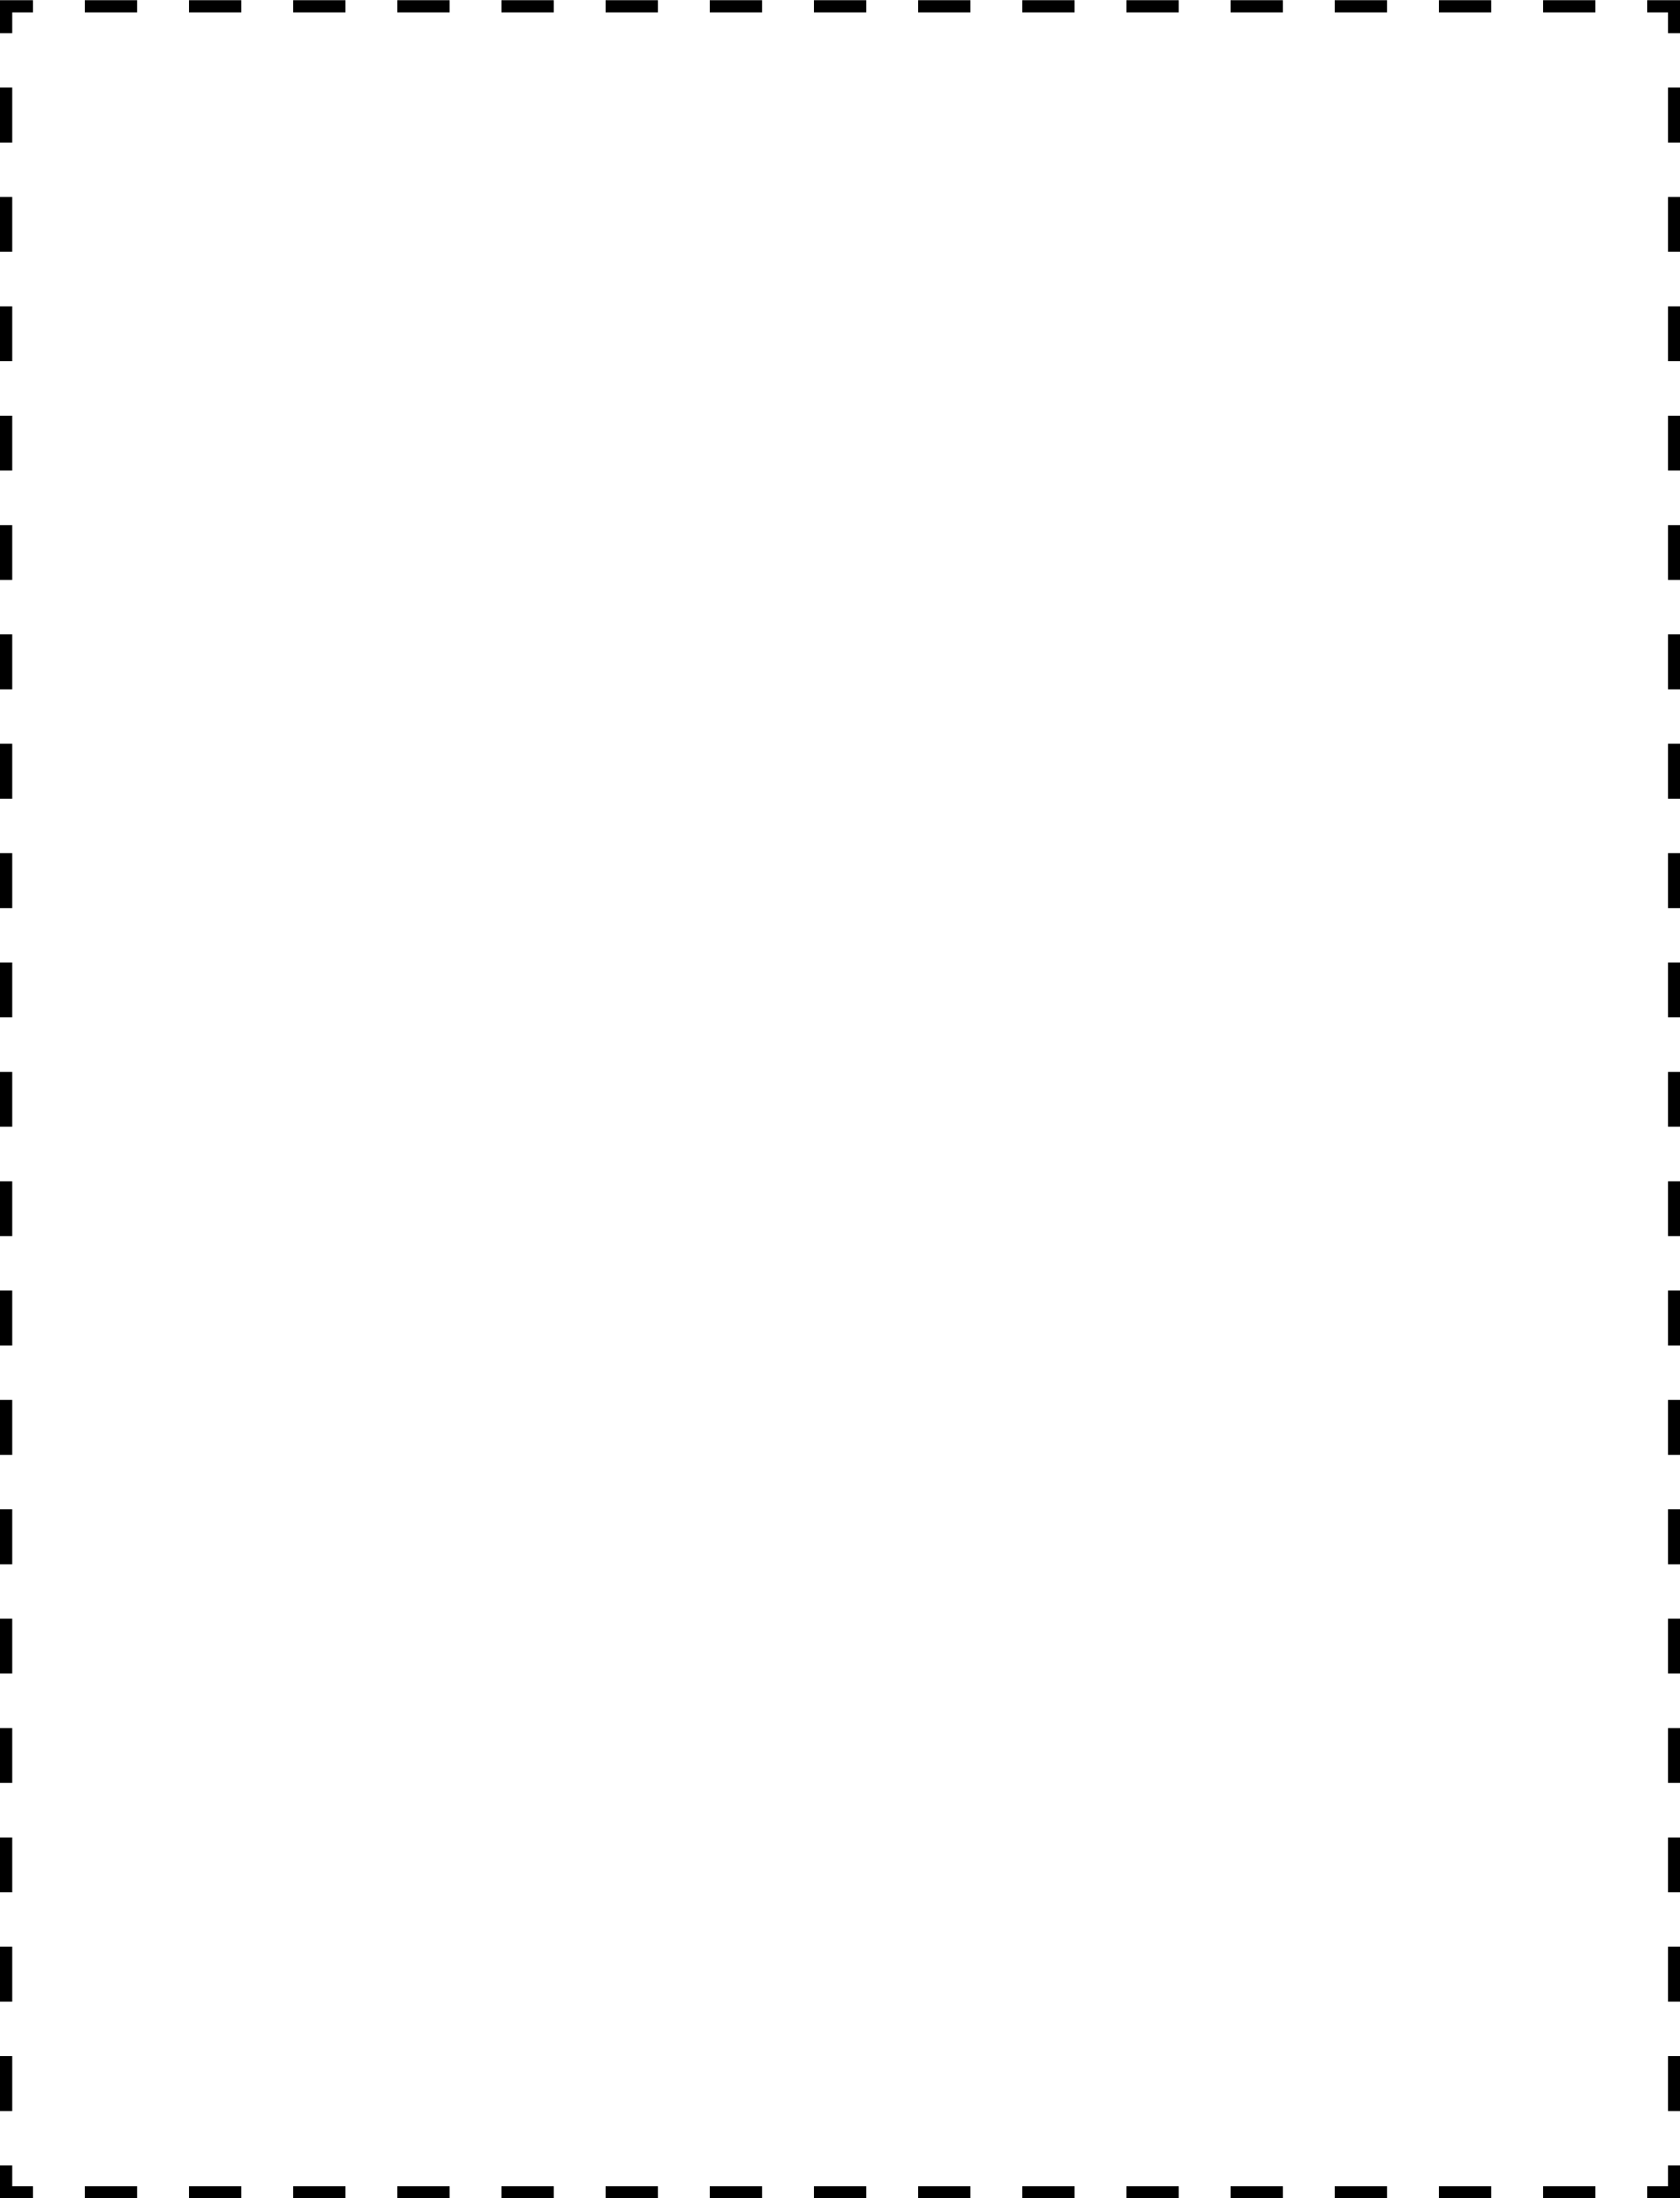 2881-coupon-outline-4x5-k.png